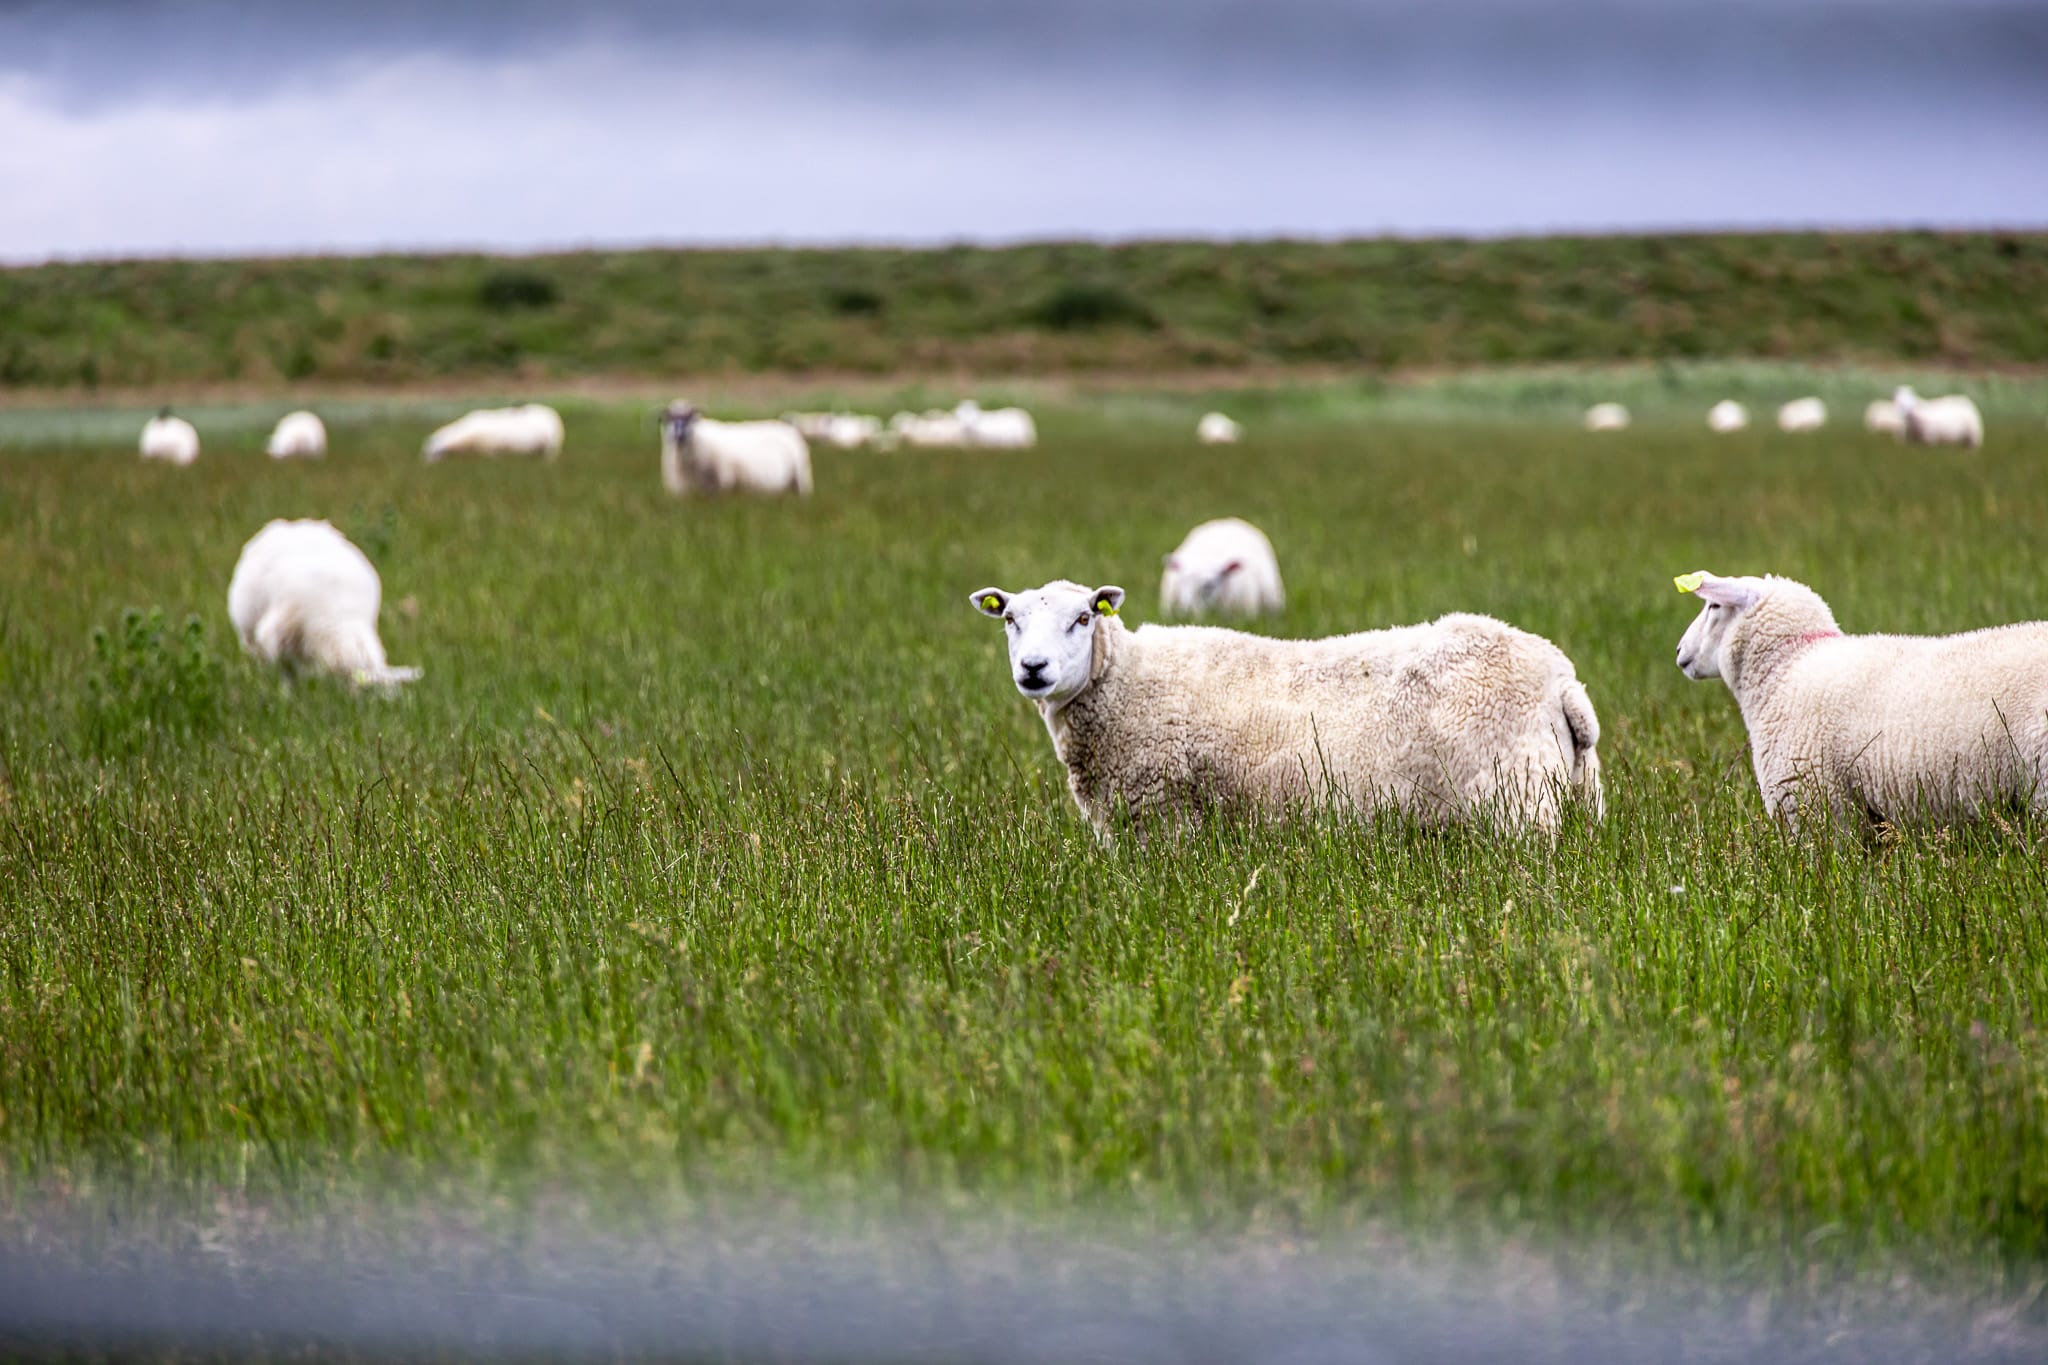 Waddensea Lamb, a local specialty produced in the Waddensea